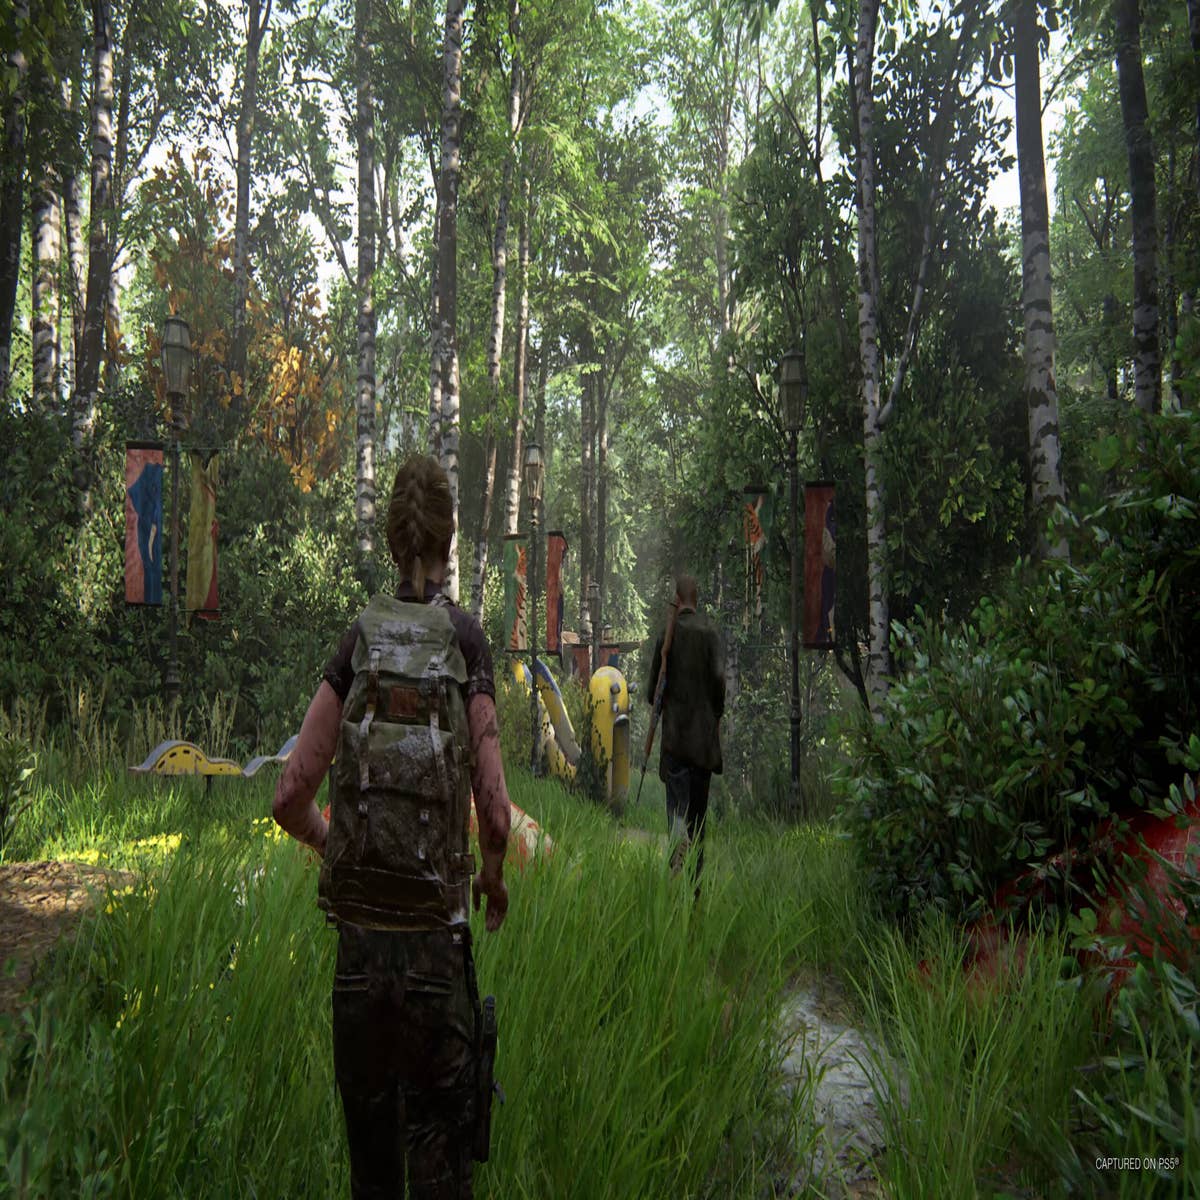 The Last of Us Part 2 Remastered's cut 'Lost Levels' don't sound